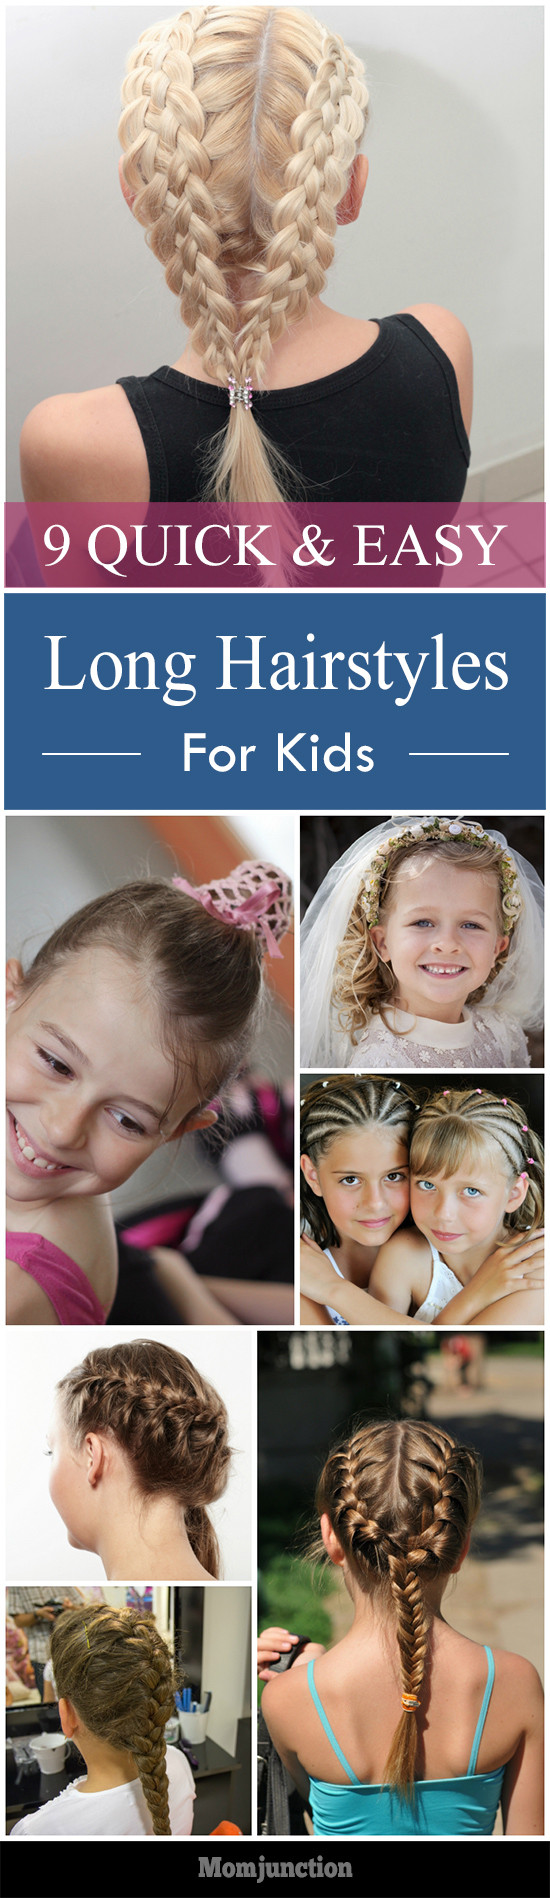 Hairstyle Kids
 9 Quick And Easy Hairstyles For Kids With Long Hair